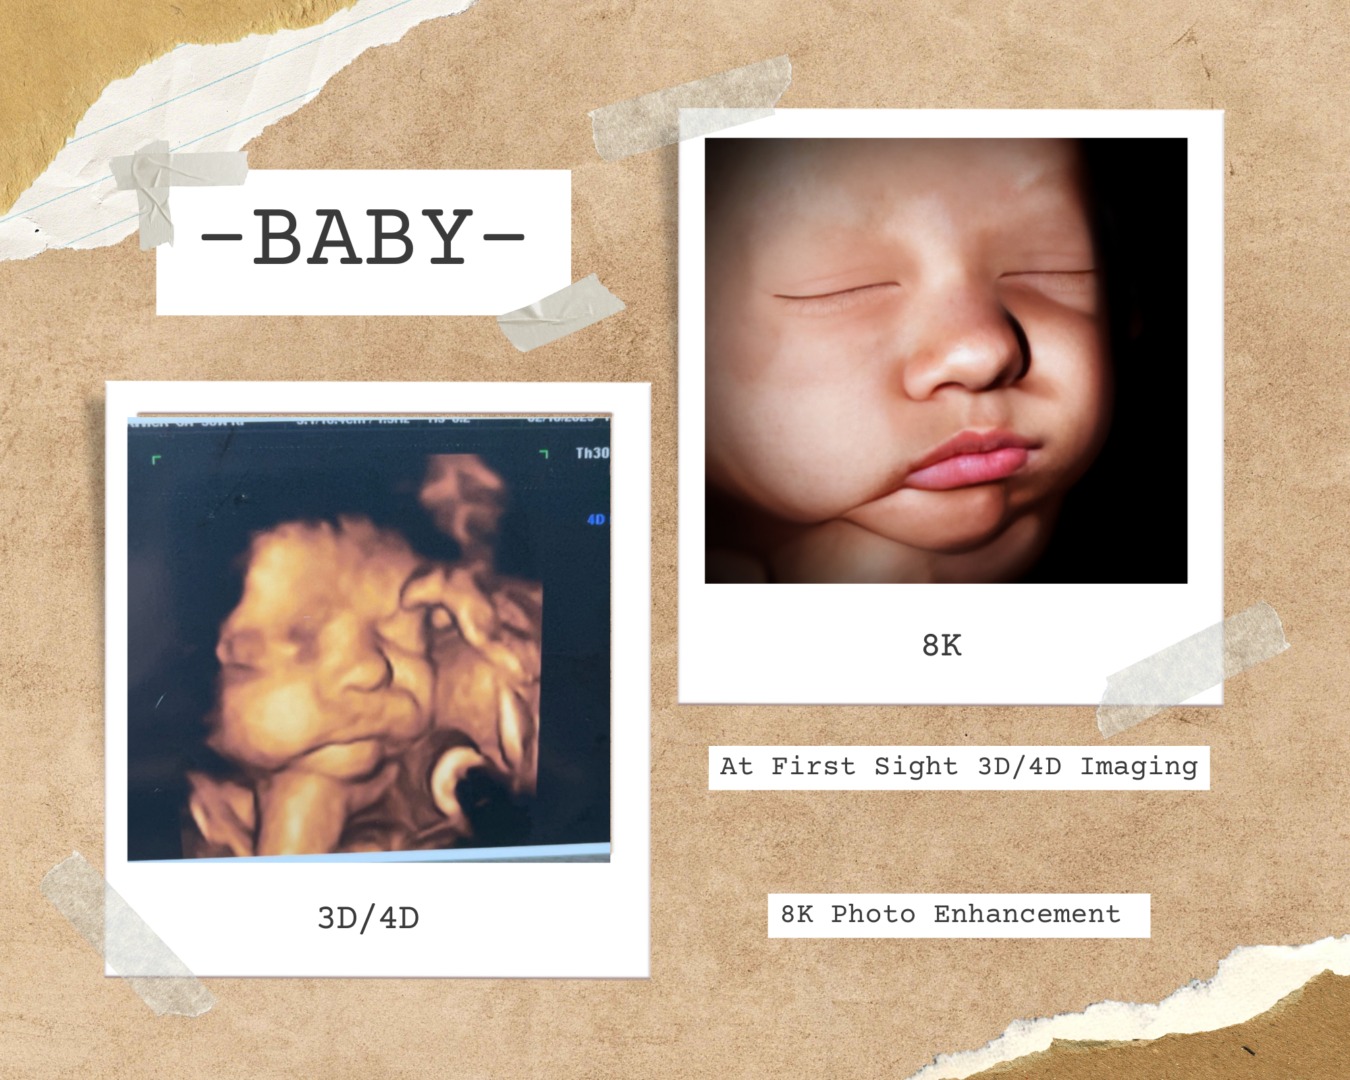 A picture of a baby and its birth photo.